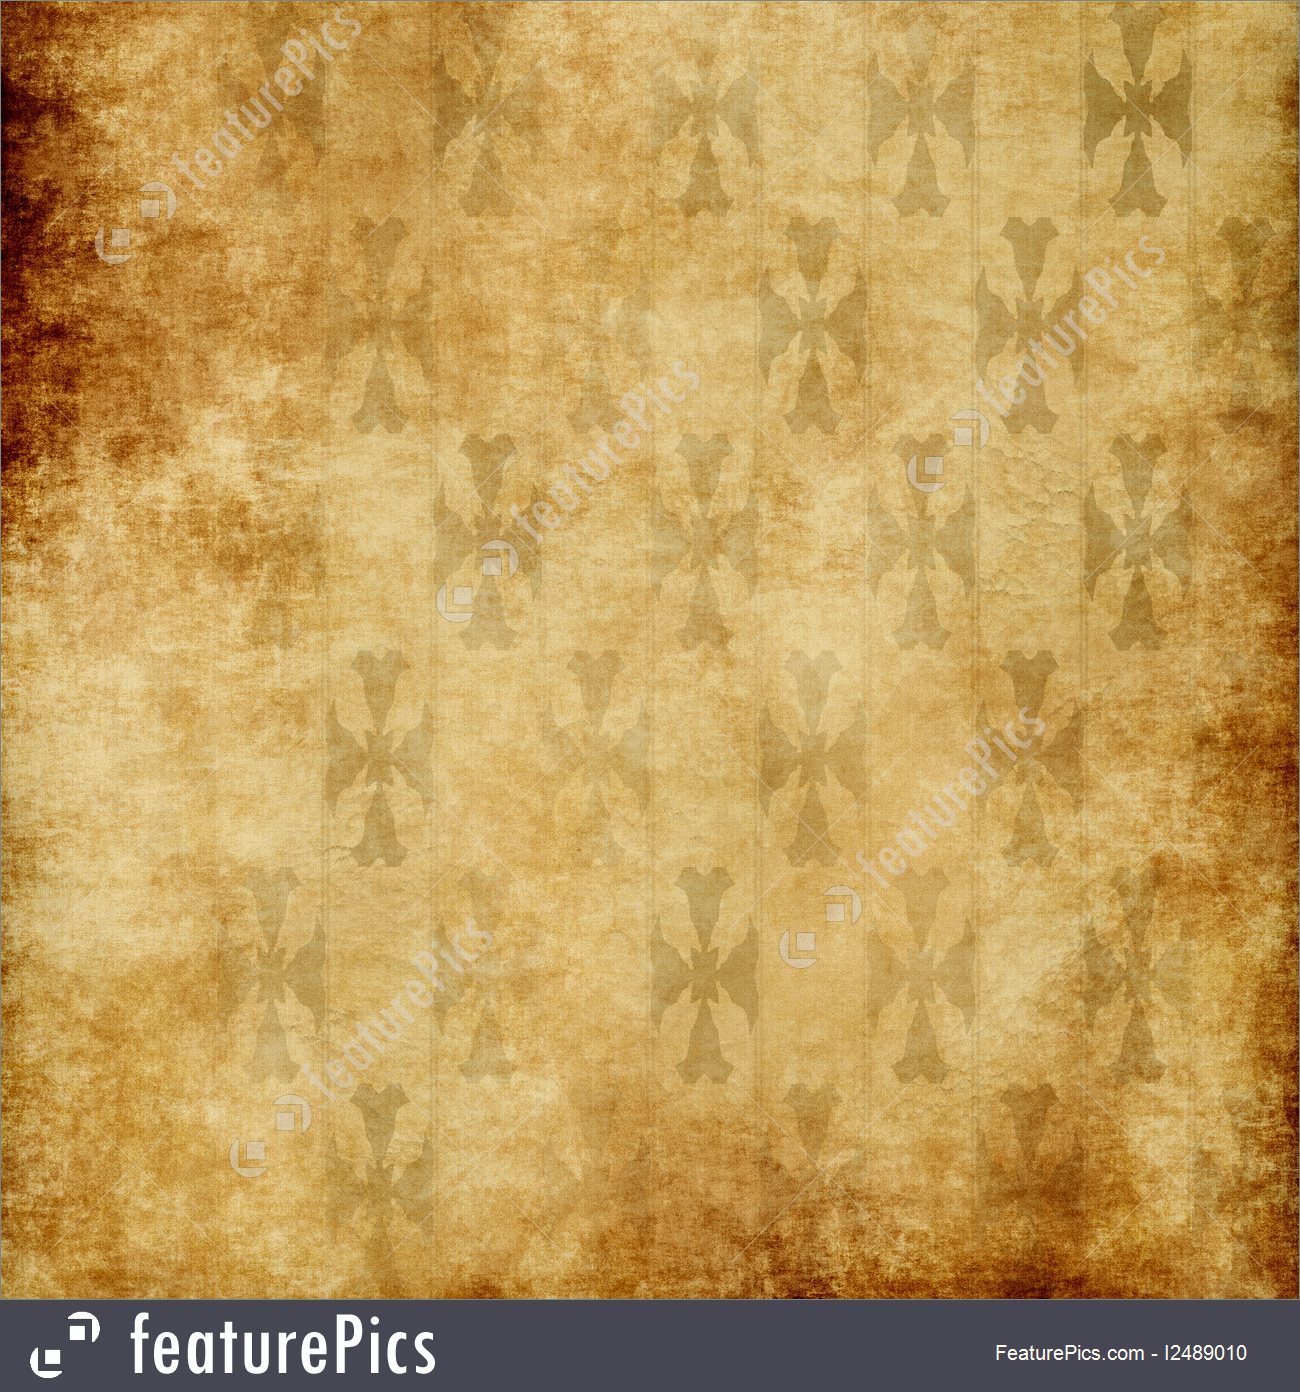 Background Image Of Old Grungy Paper Or Wallpaper - Old - HD Wallpaper 